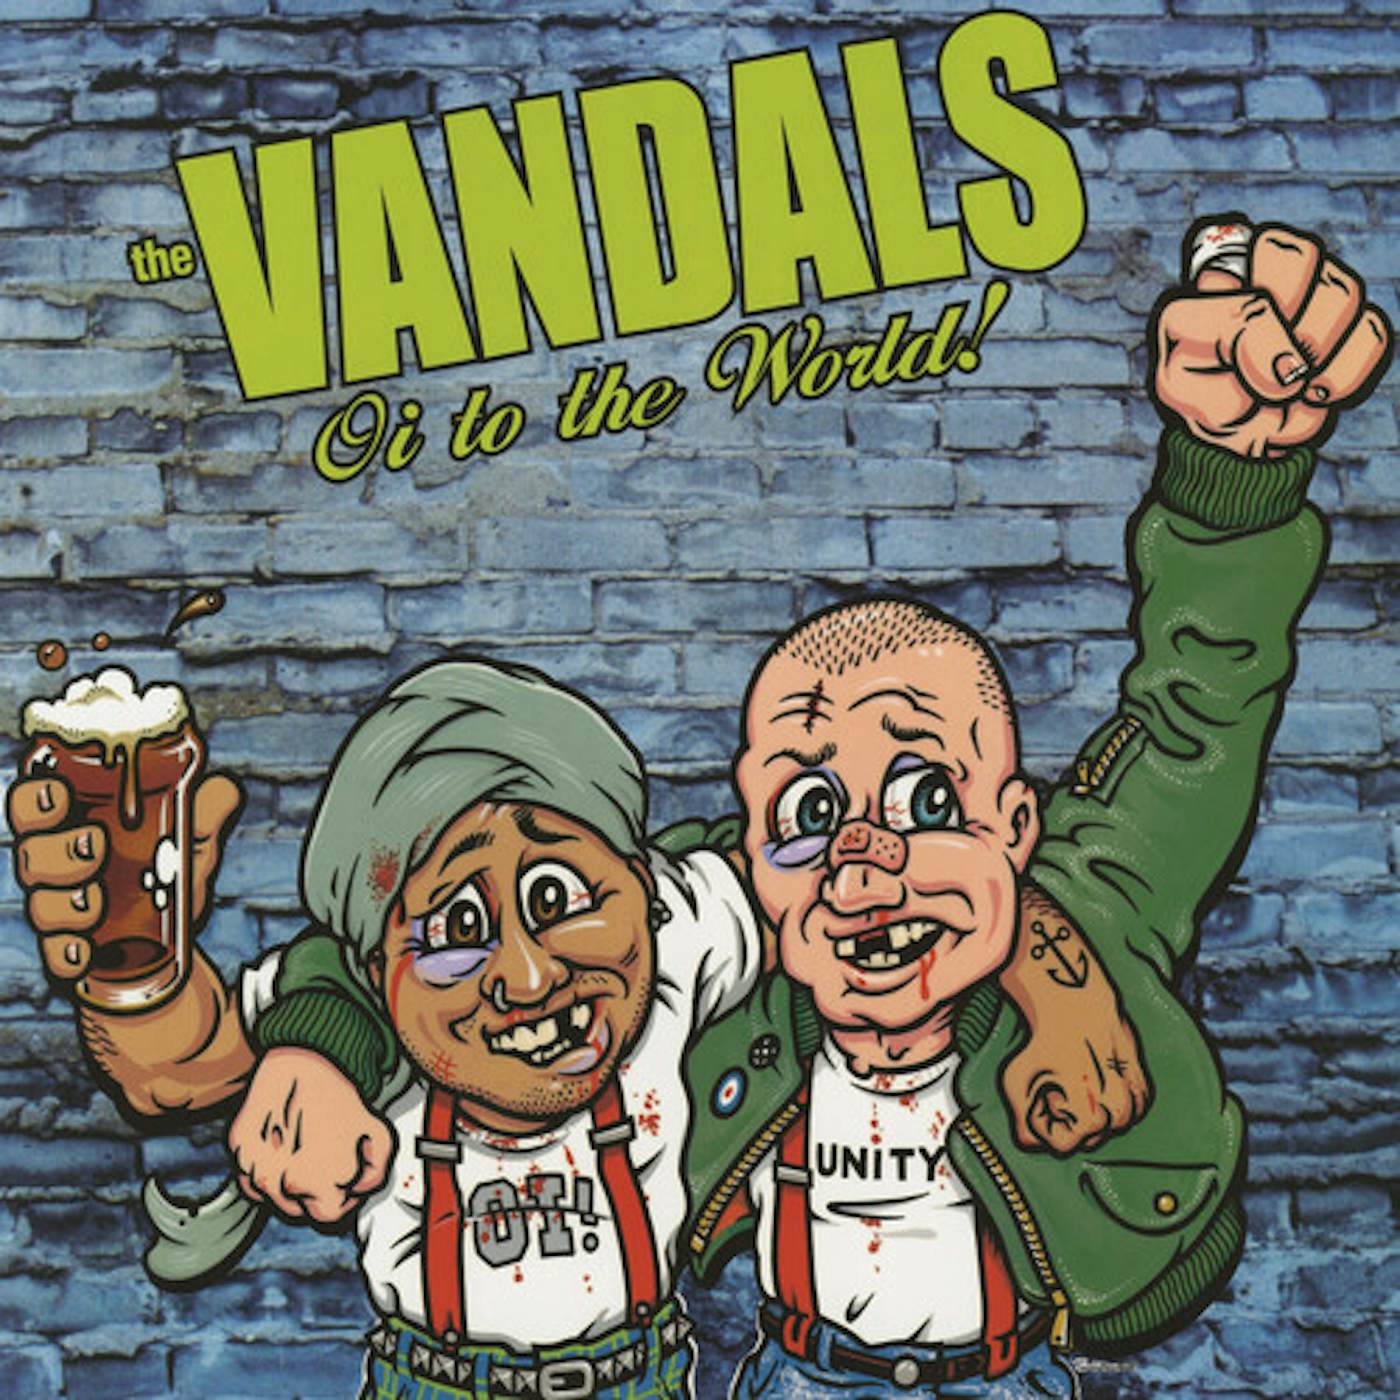 The Vandals  OI TO THE WORLD - WHITE Vinyl Record